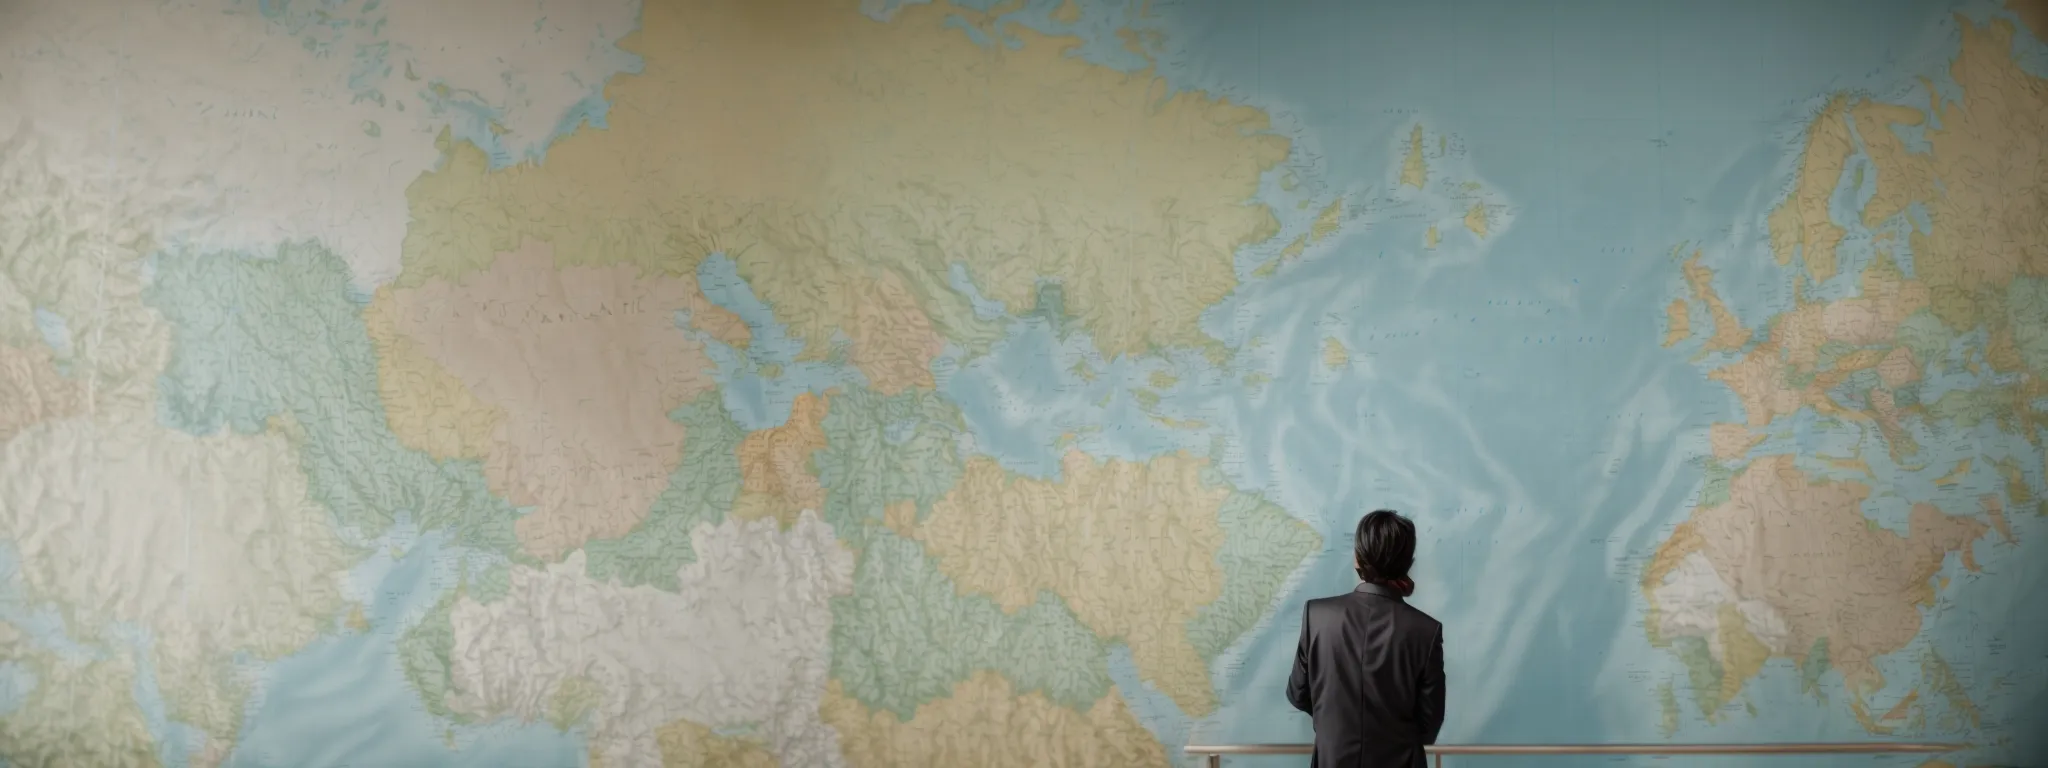 a person examines a large, detailed world map pinned on a wall, highlighting different regions with color-coded markers.